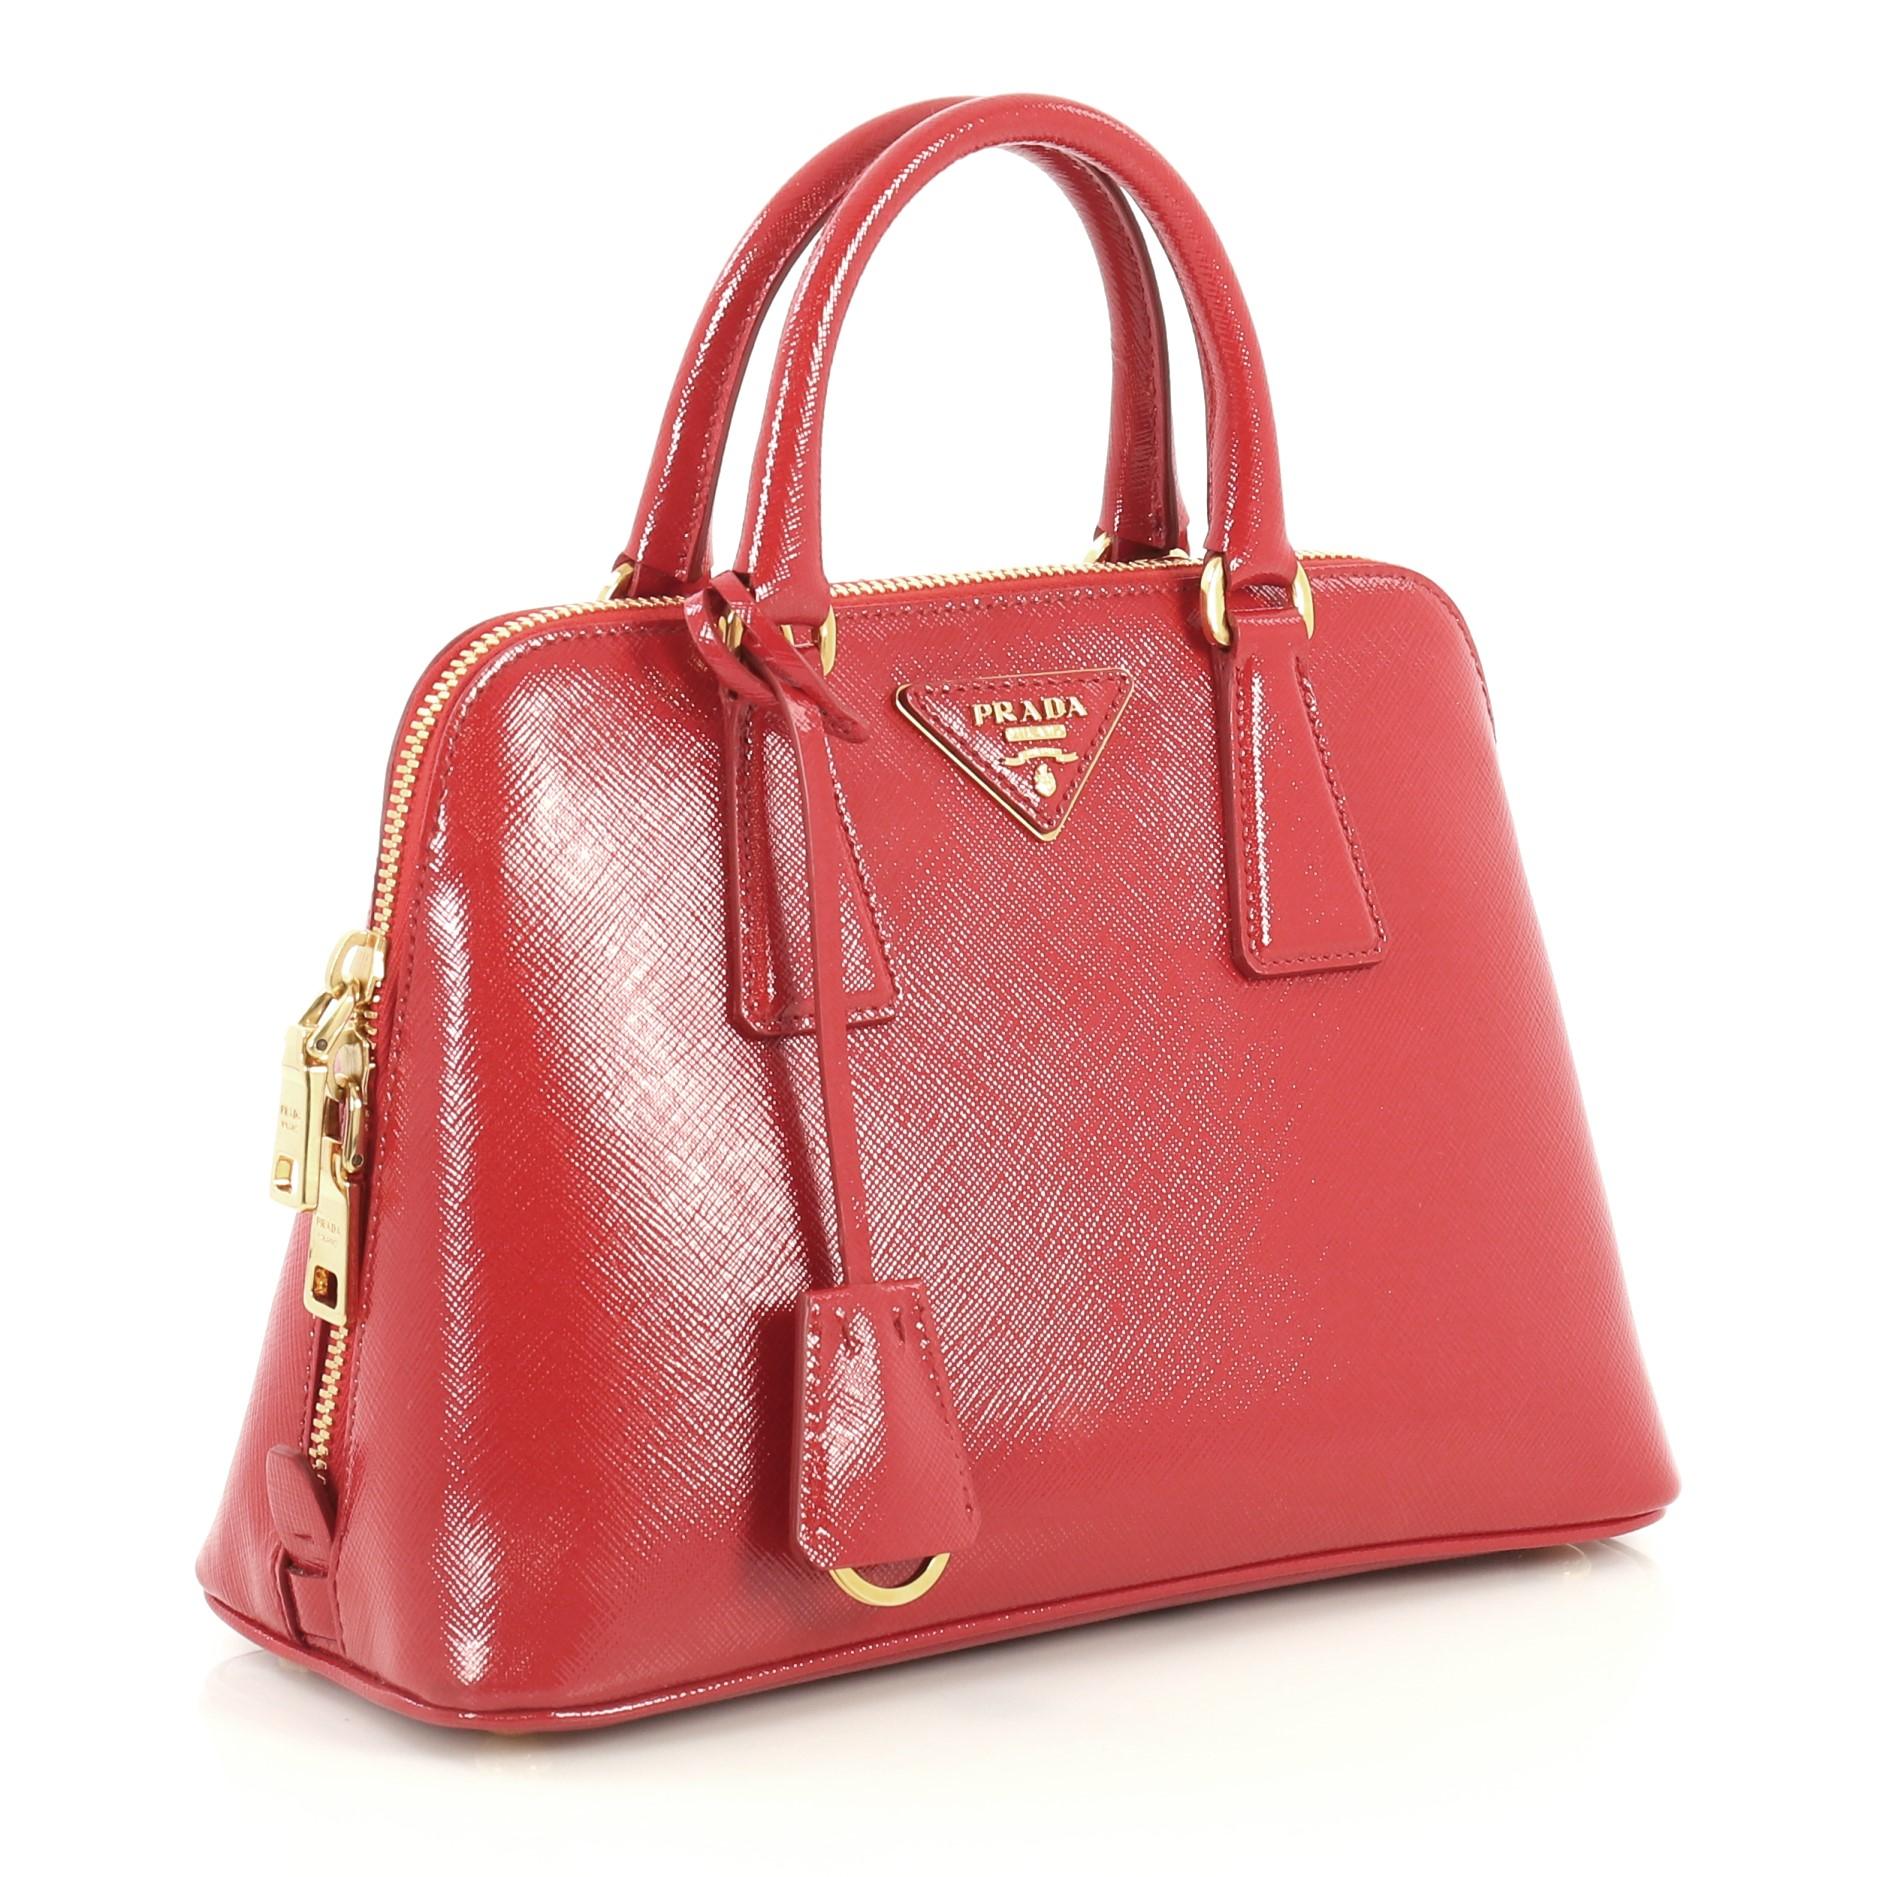 This Prada Promenade Bag Vernice Saffiano Leather Small, crafted from red vernice saffiano leather, features dual rolled handles, protective base studs and gold-tone hardware. Its zip closure opens to a red fabric interior divided into two